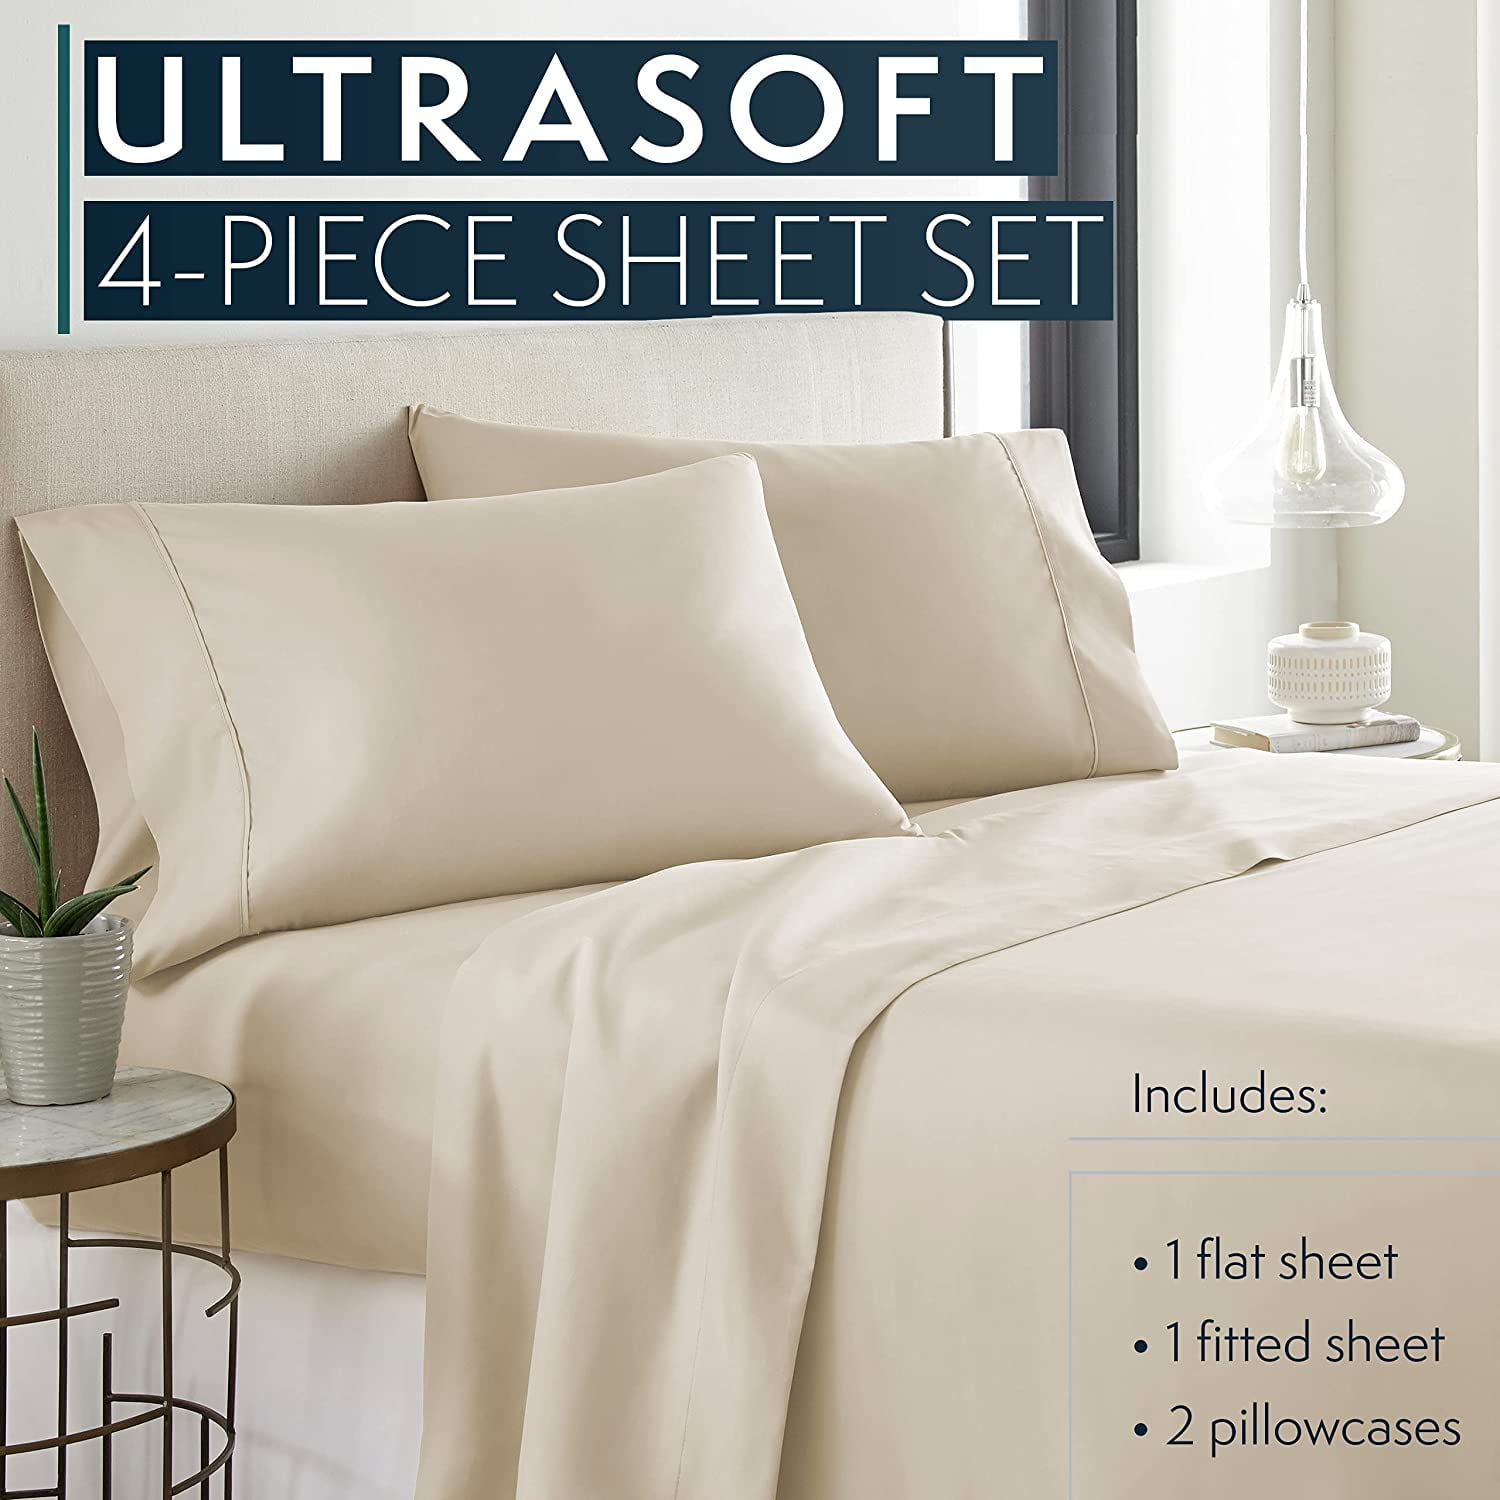 4 Piece Luxury Hotel Series Bed Sheet Set, Ultra Soft, Cool to the tou